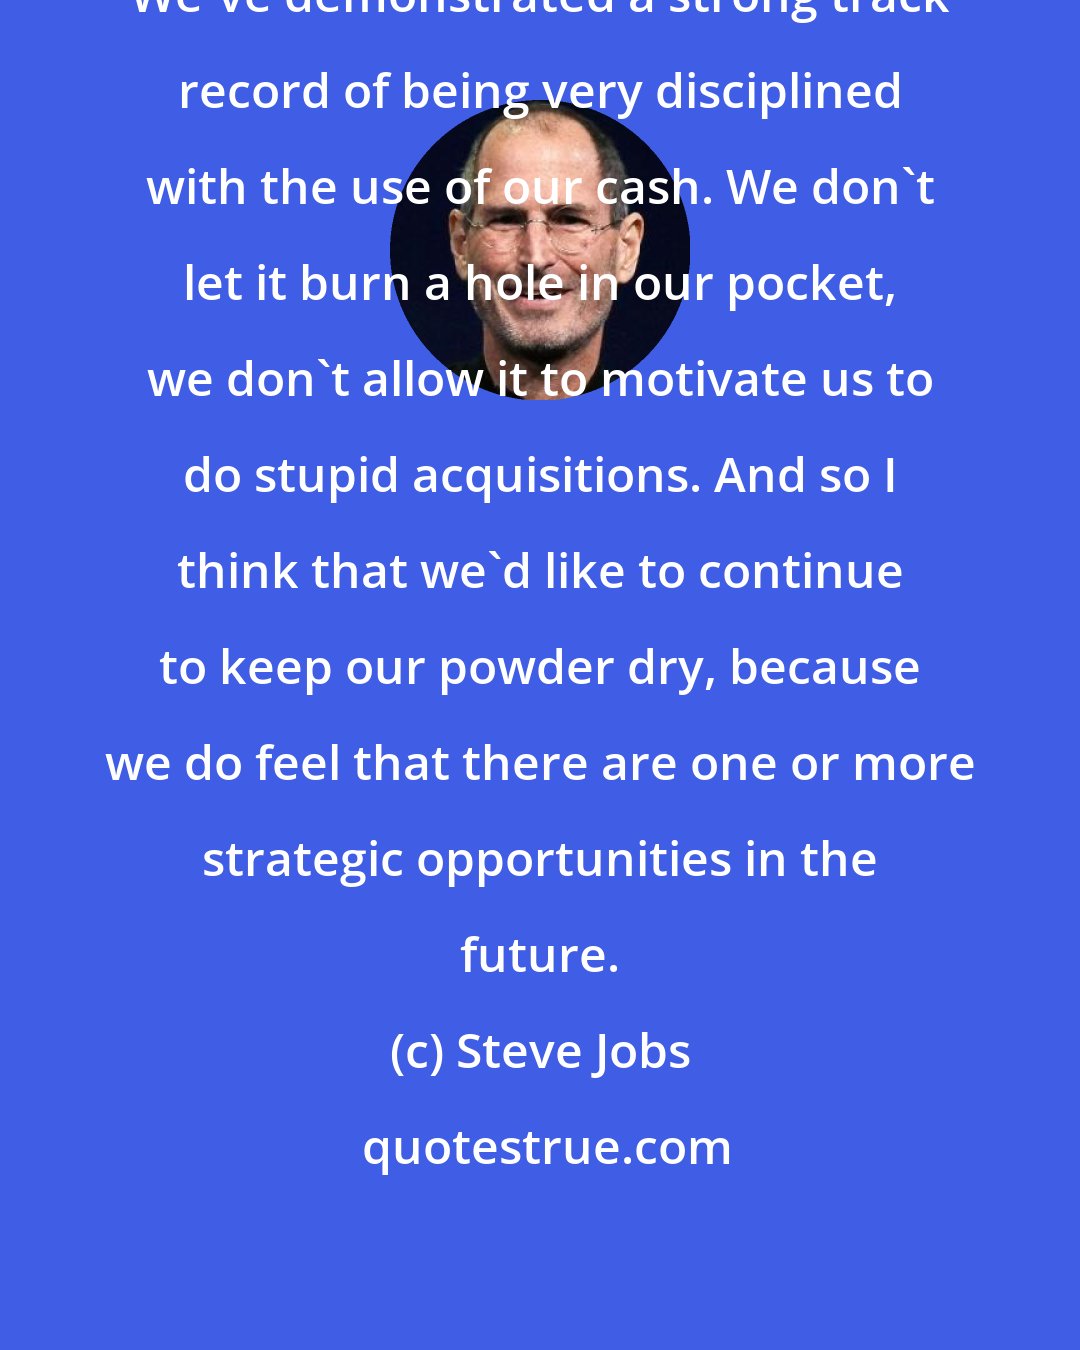 Steve Jobs: We've demonstrated a strong track record of being very disciplined with the use of our cash. We don't let it burn a hole in our pocket, we don't allow it to motivate us to do stupid acquisitions. And so I think that we'd like to continue to keep our powder dry, because we do feel that there are one or more strategic opportunities in the future.